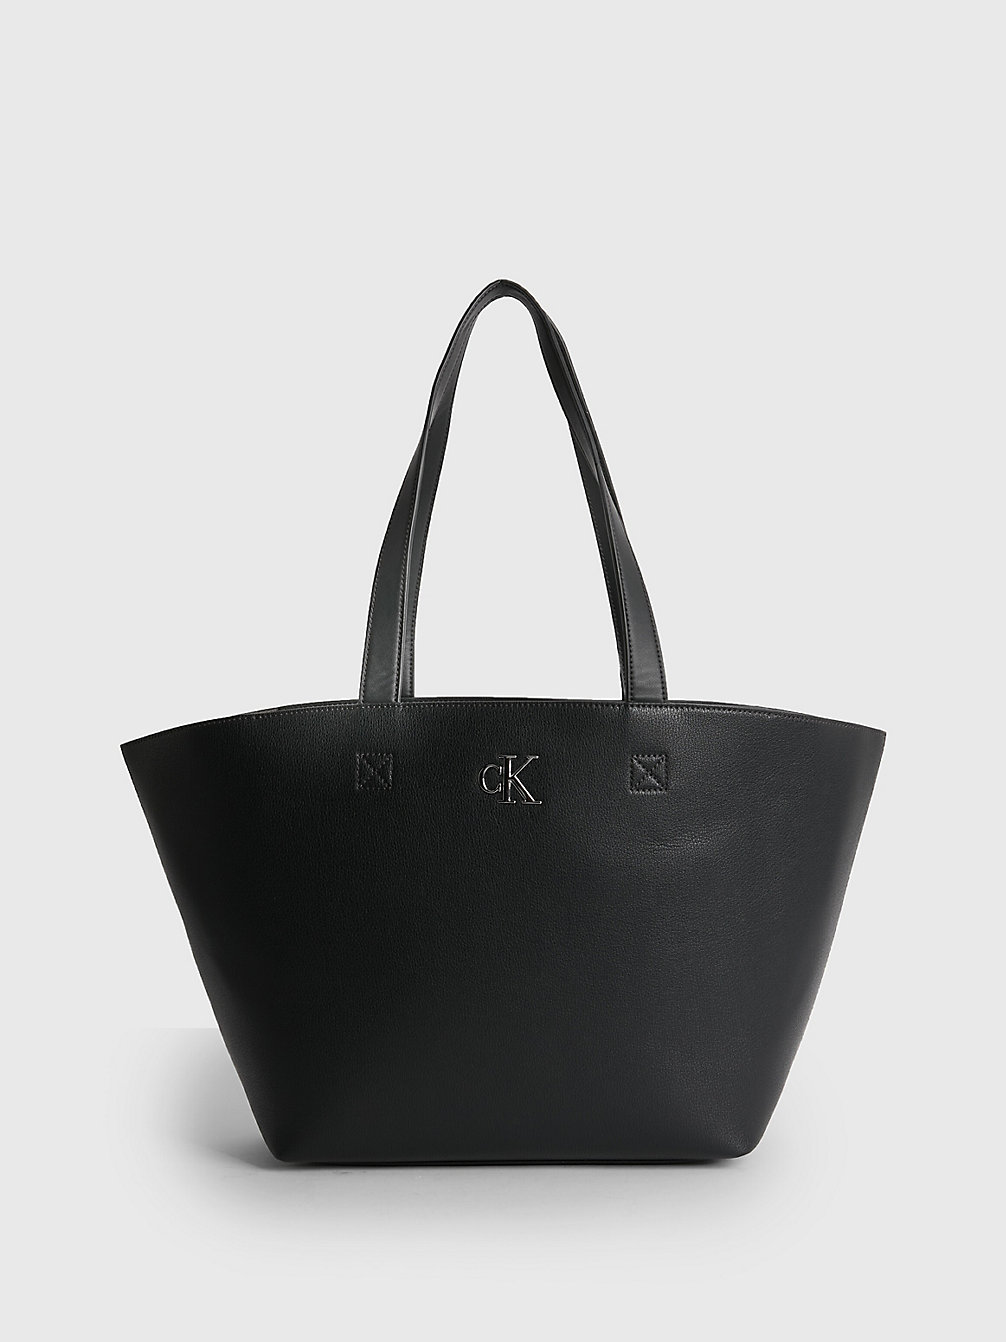 BLACK Recycled Tote Bag undefined women Calvin Klein